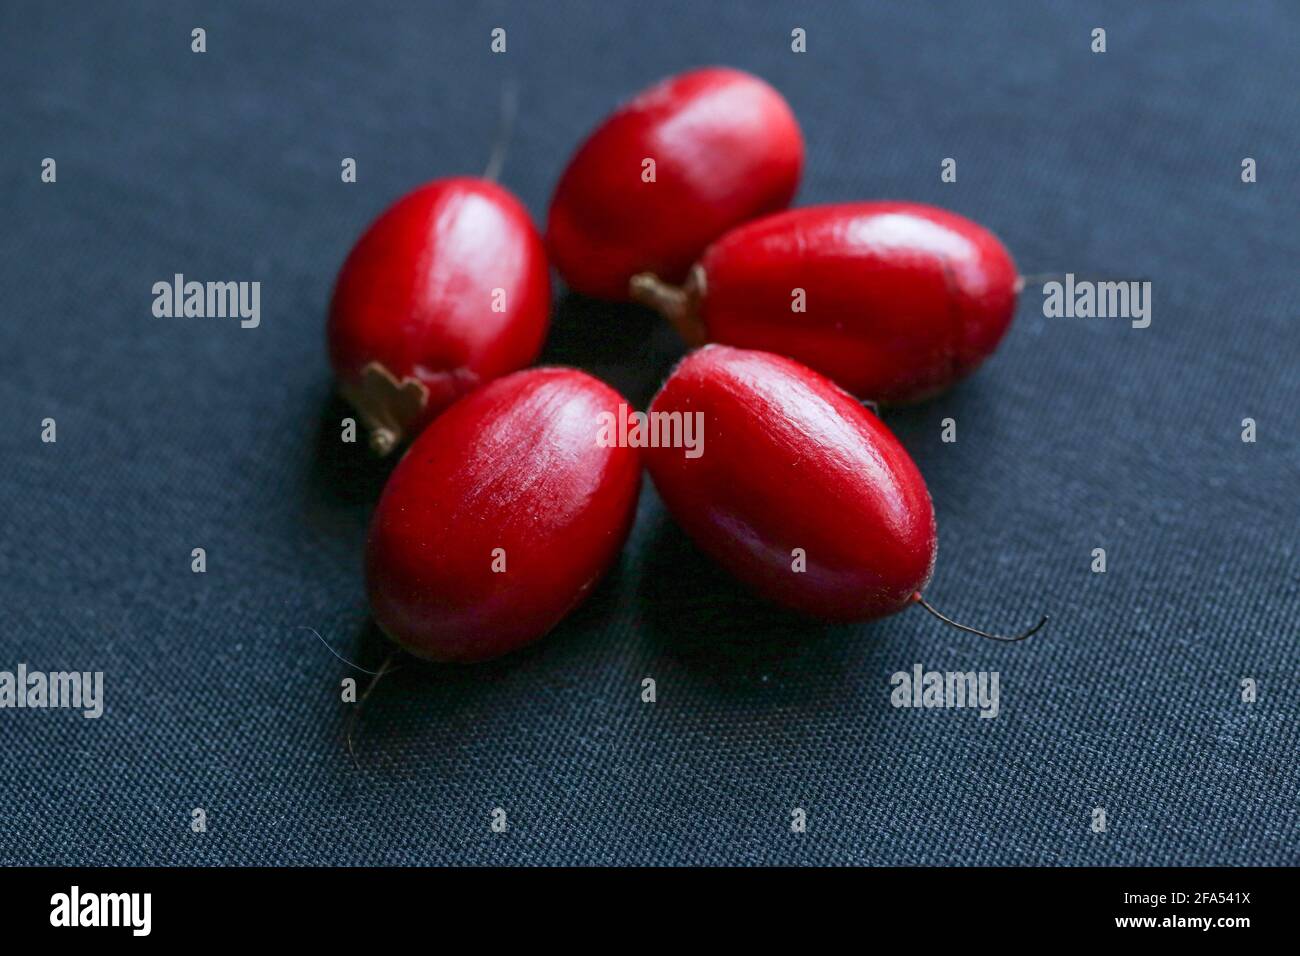 Synsepalum dulcificum is a plant known for its berry that, when eaten, causes sour foods subsequently consumed to taste sweet. Stock Photo